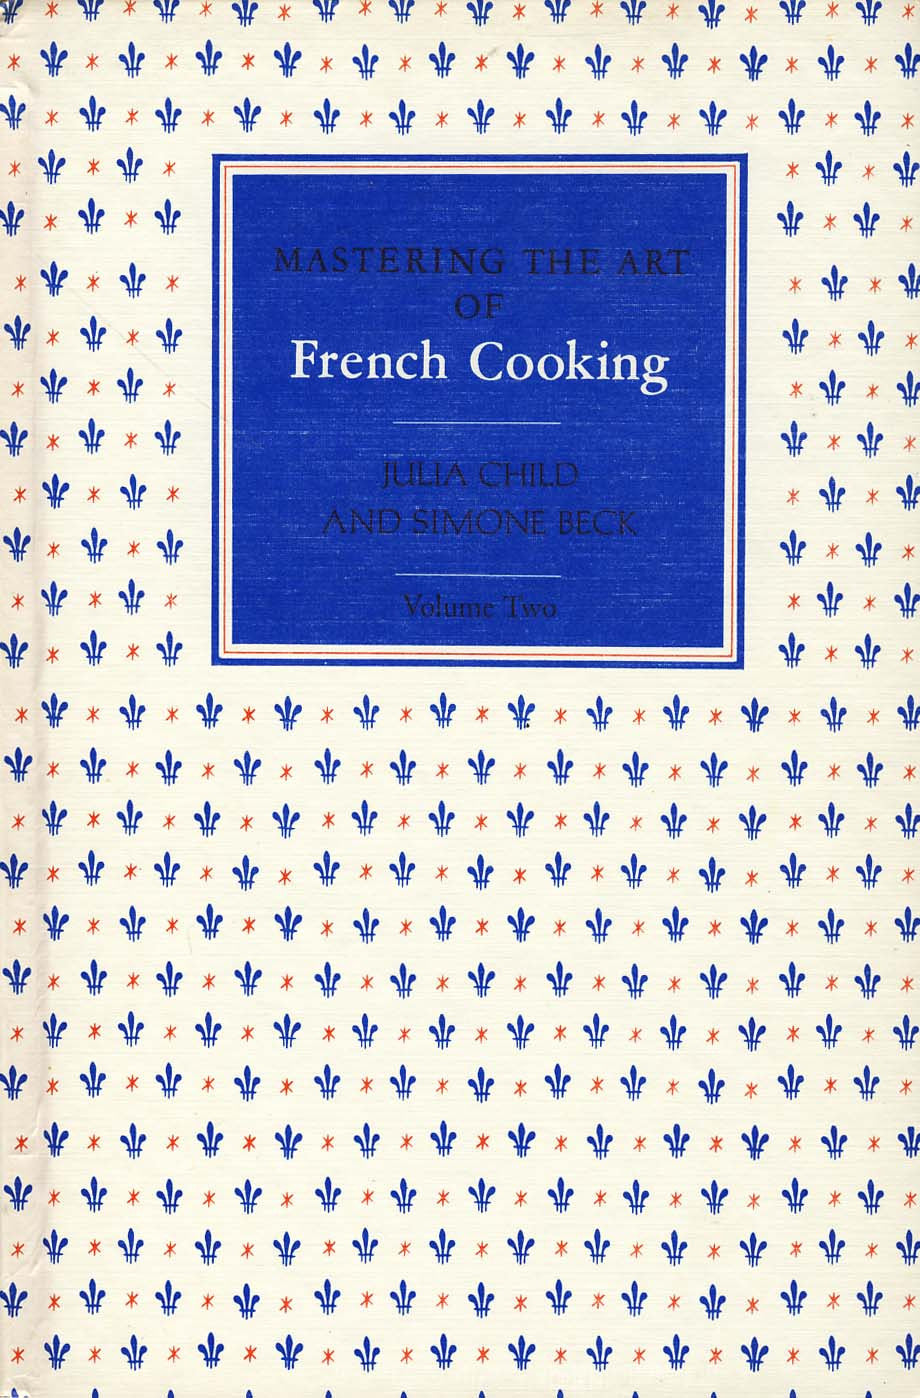 Mastering the Art of French Cooking Volume 2 - Julia Child